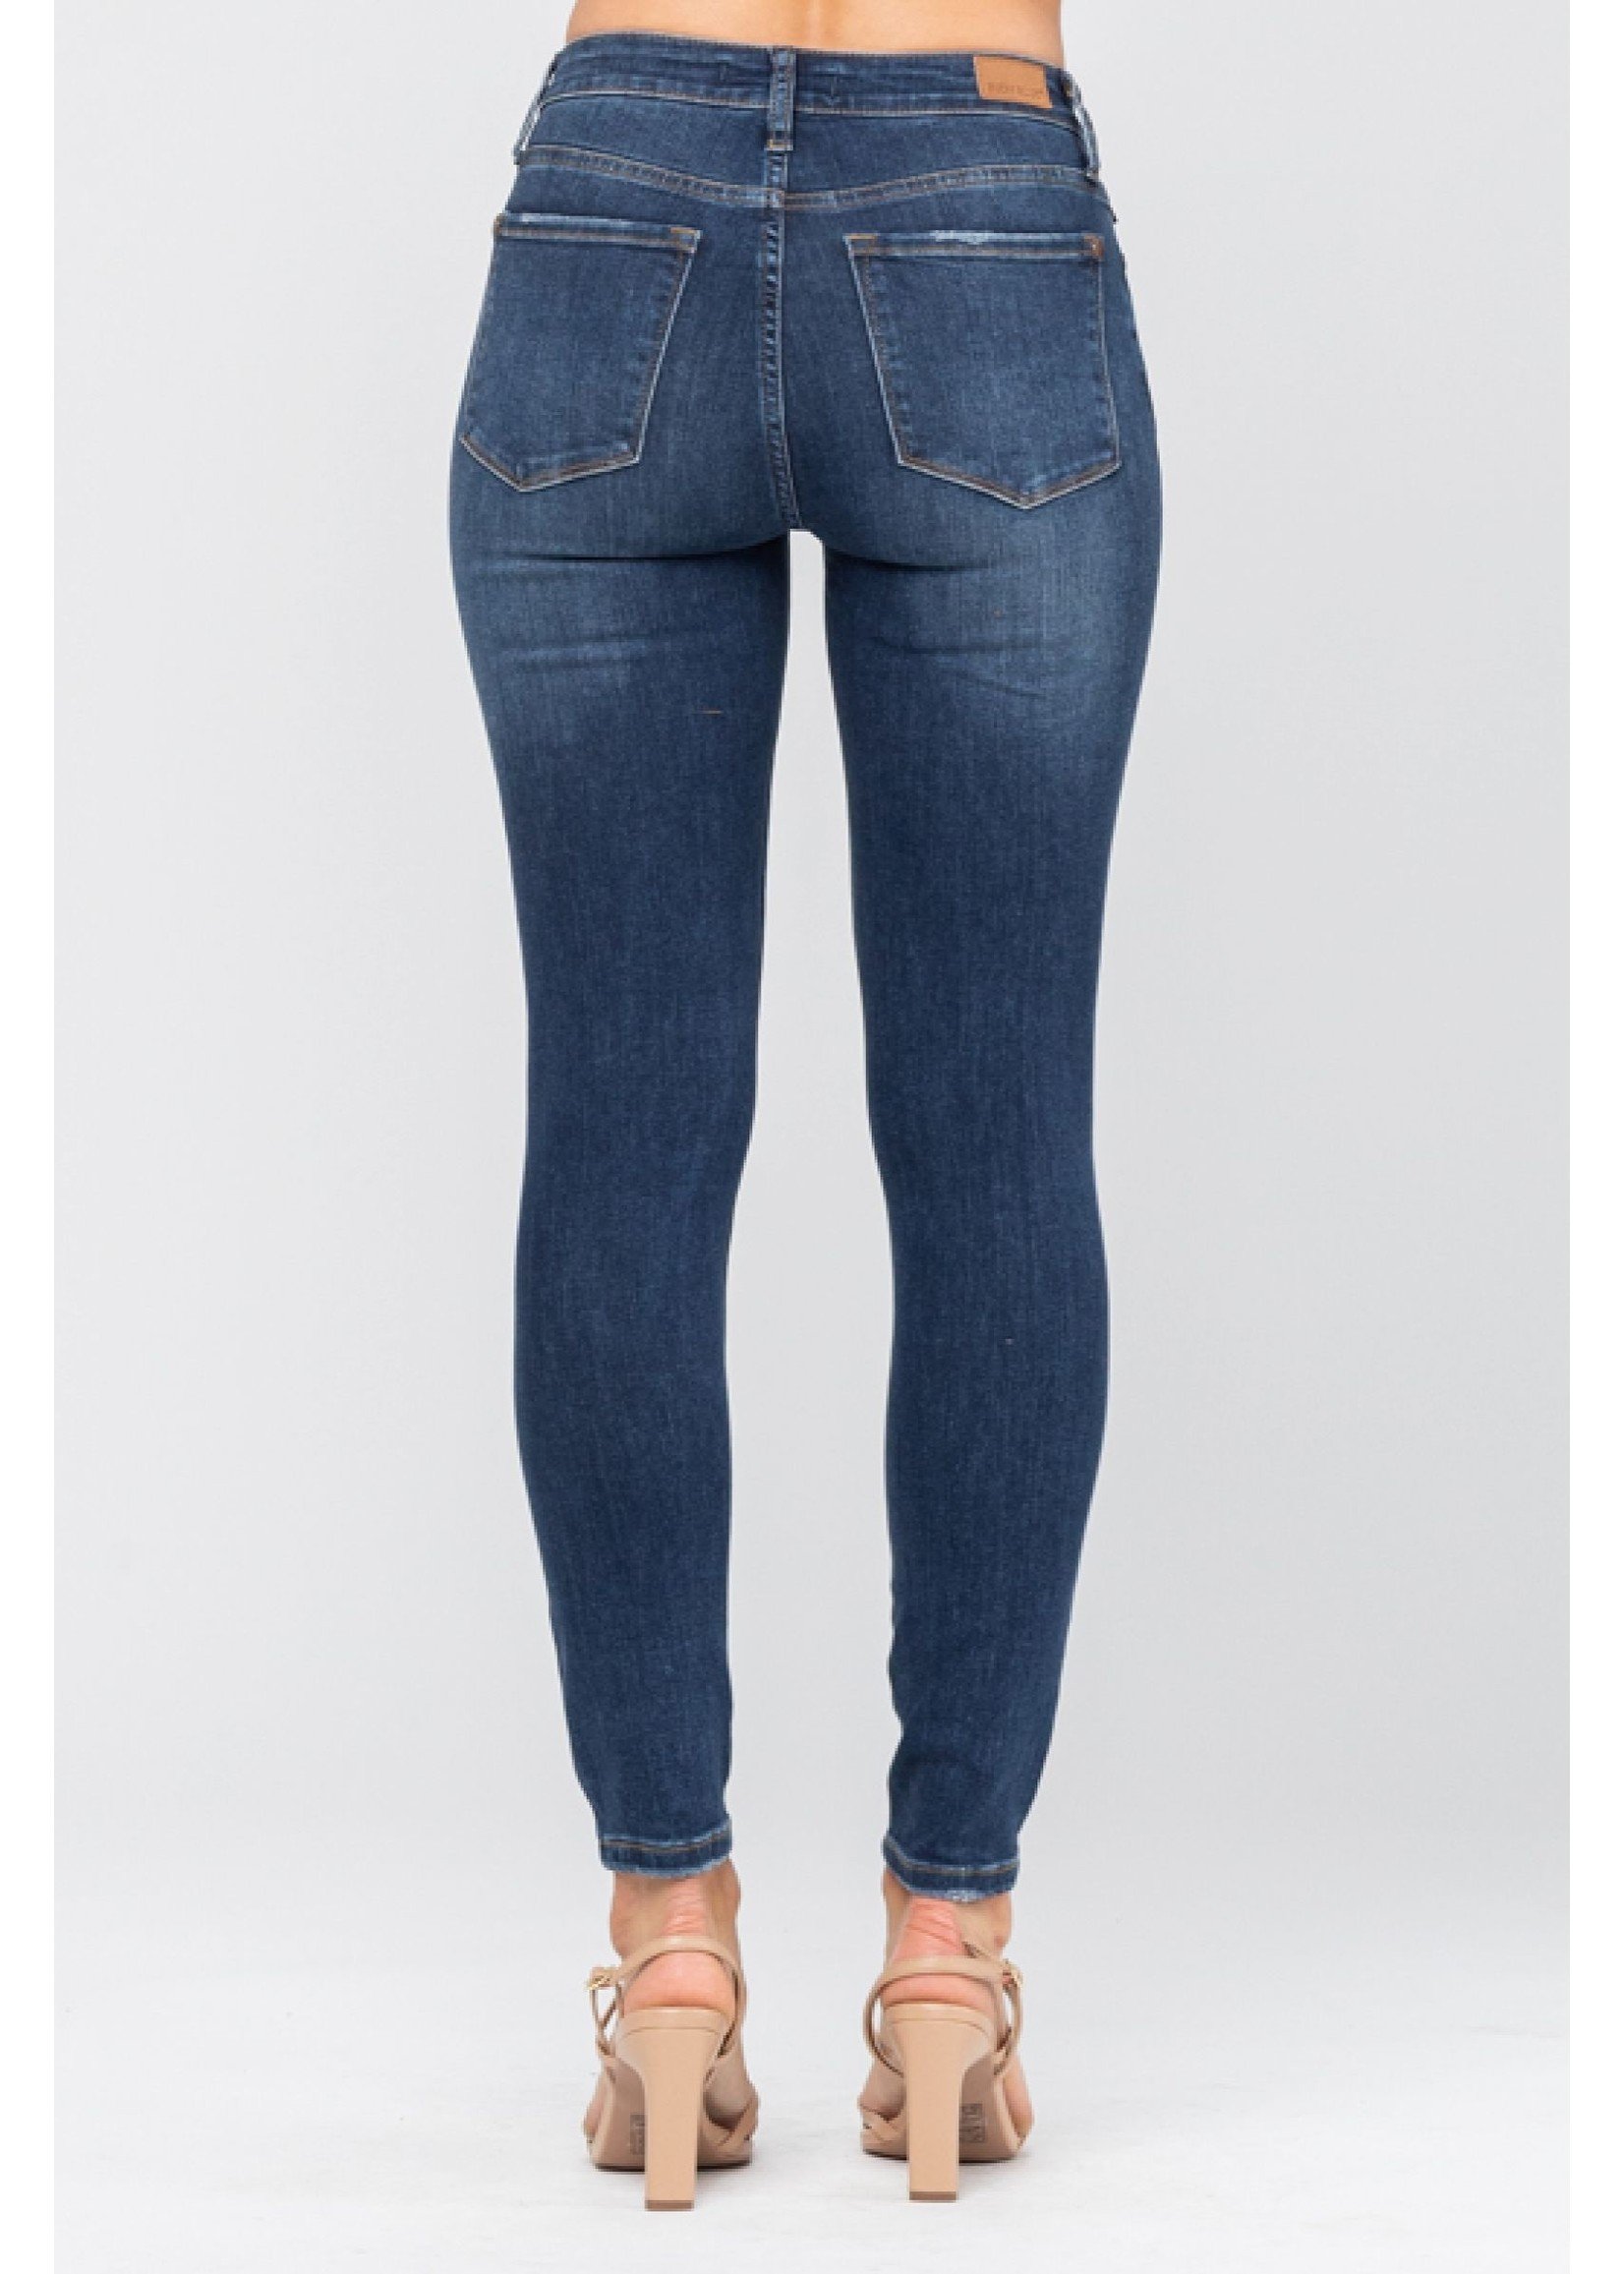 BUTTON FLY SKINNY JEANS